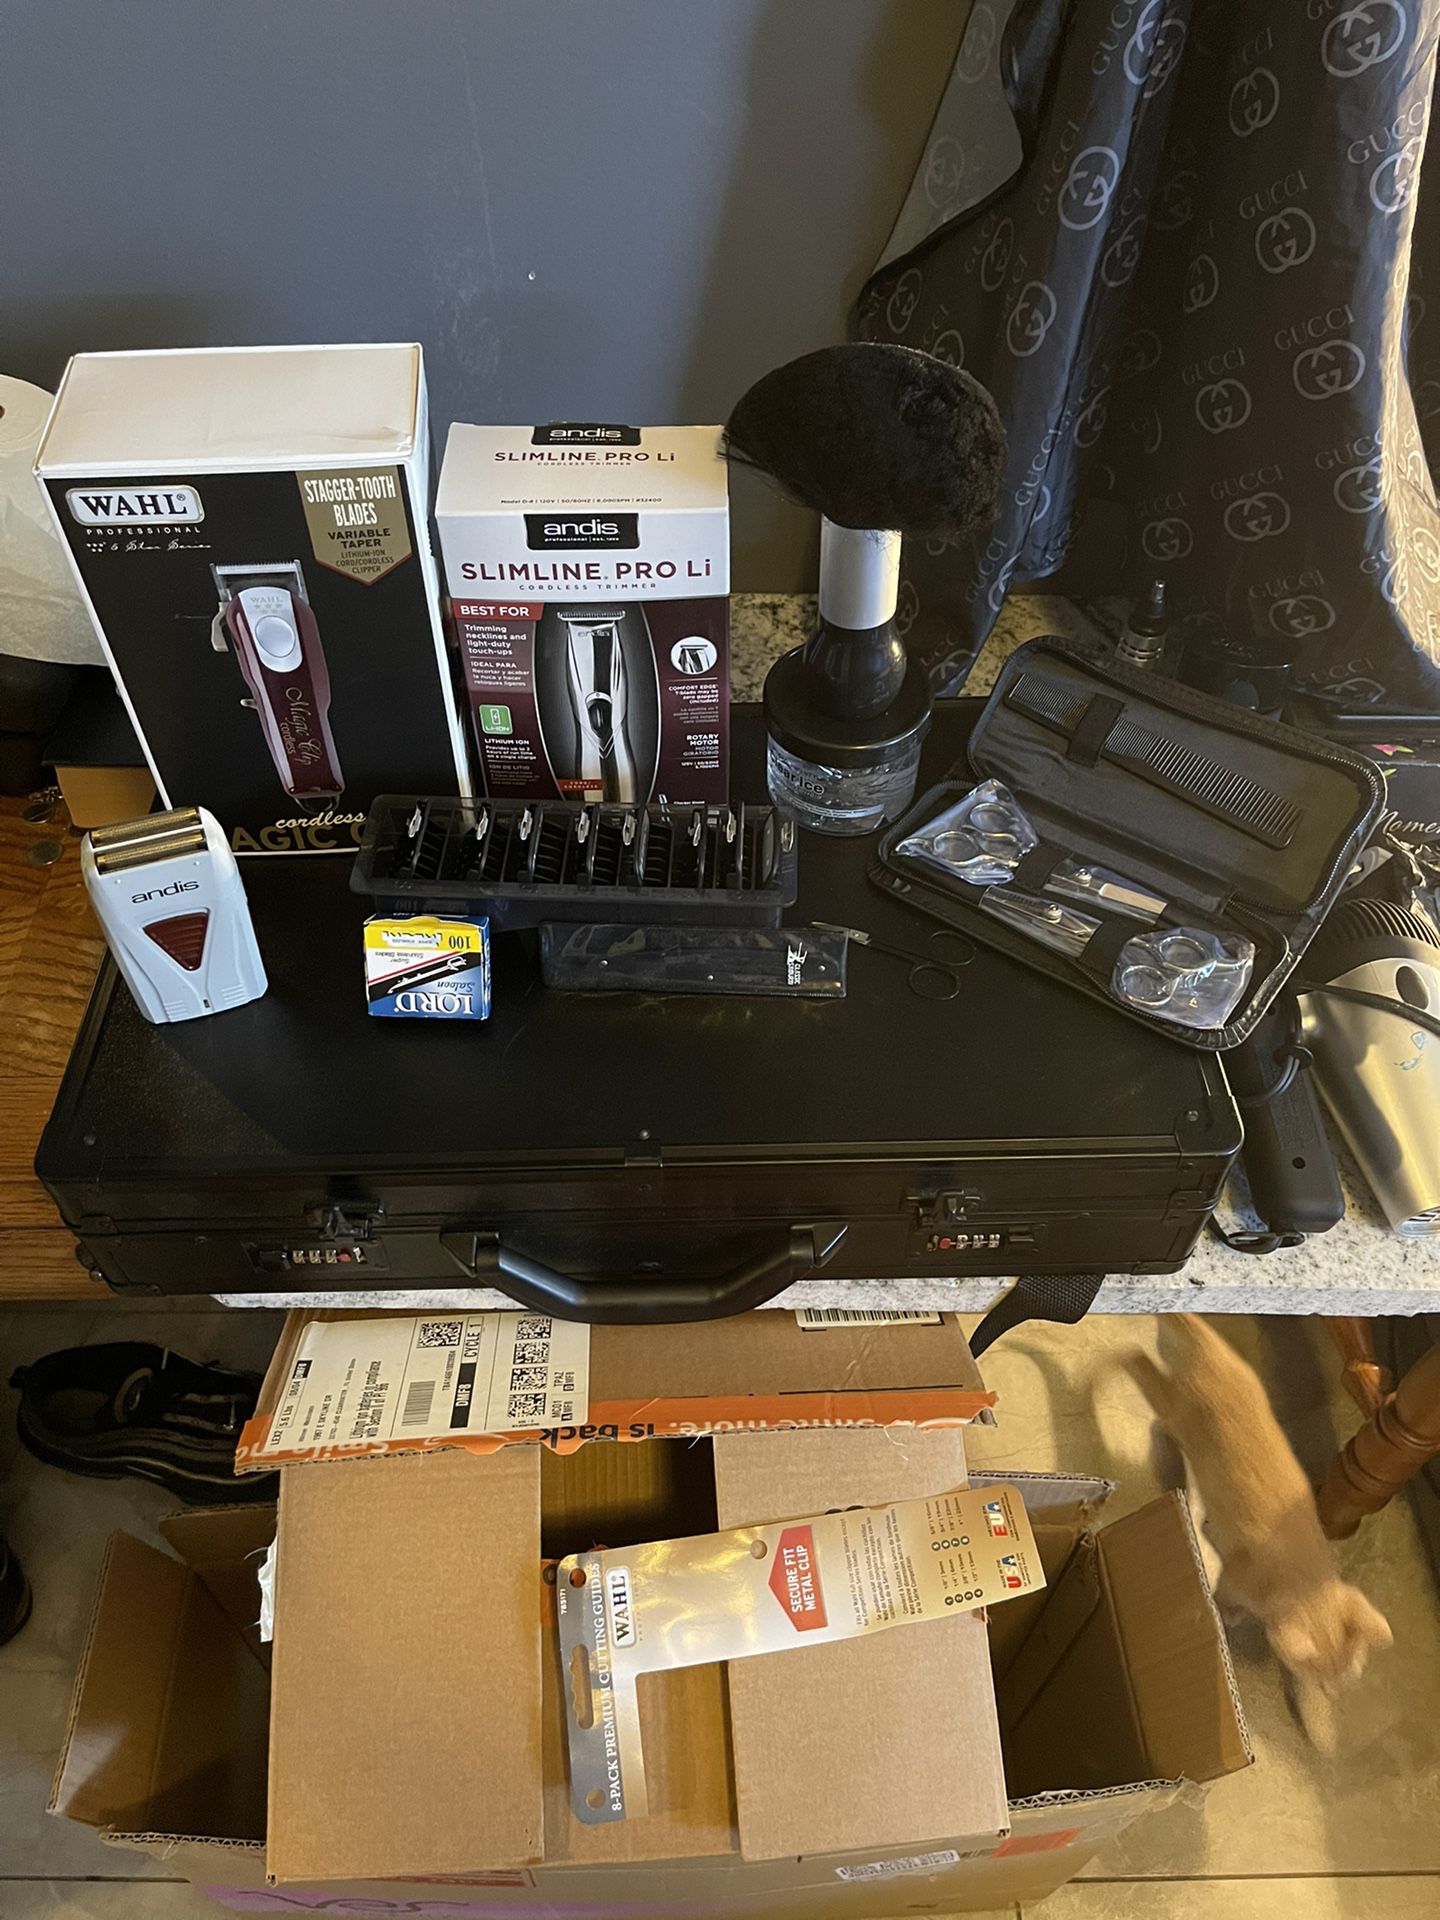 BARBER KIT / Wahl Magic Clippers/ Andis Shaver / Slim Pro 